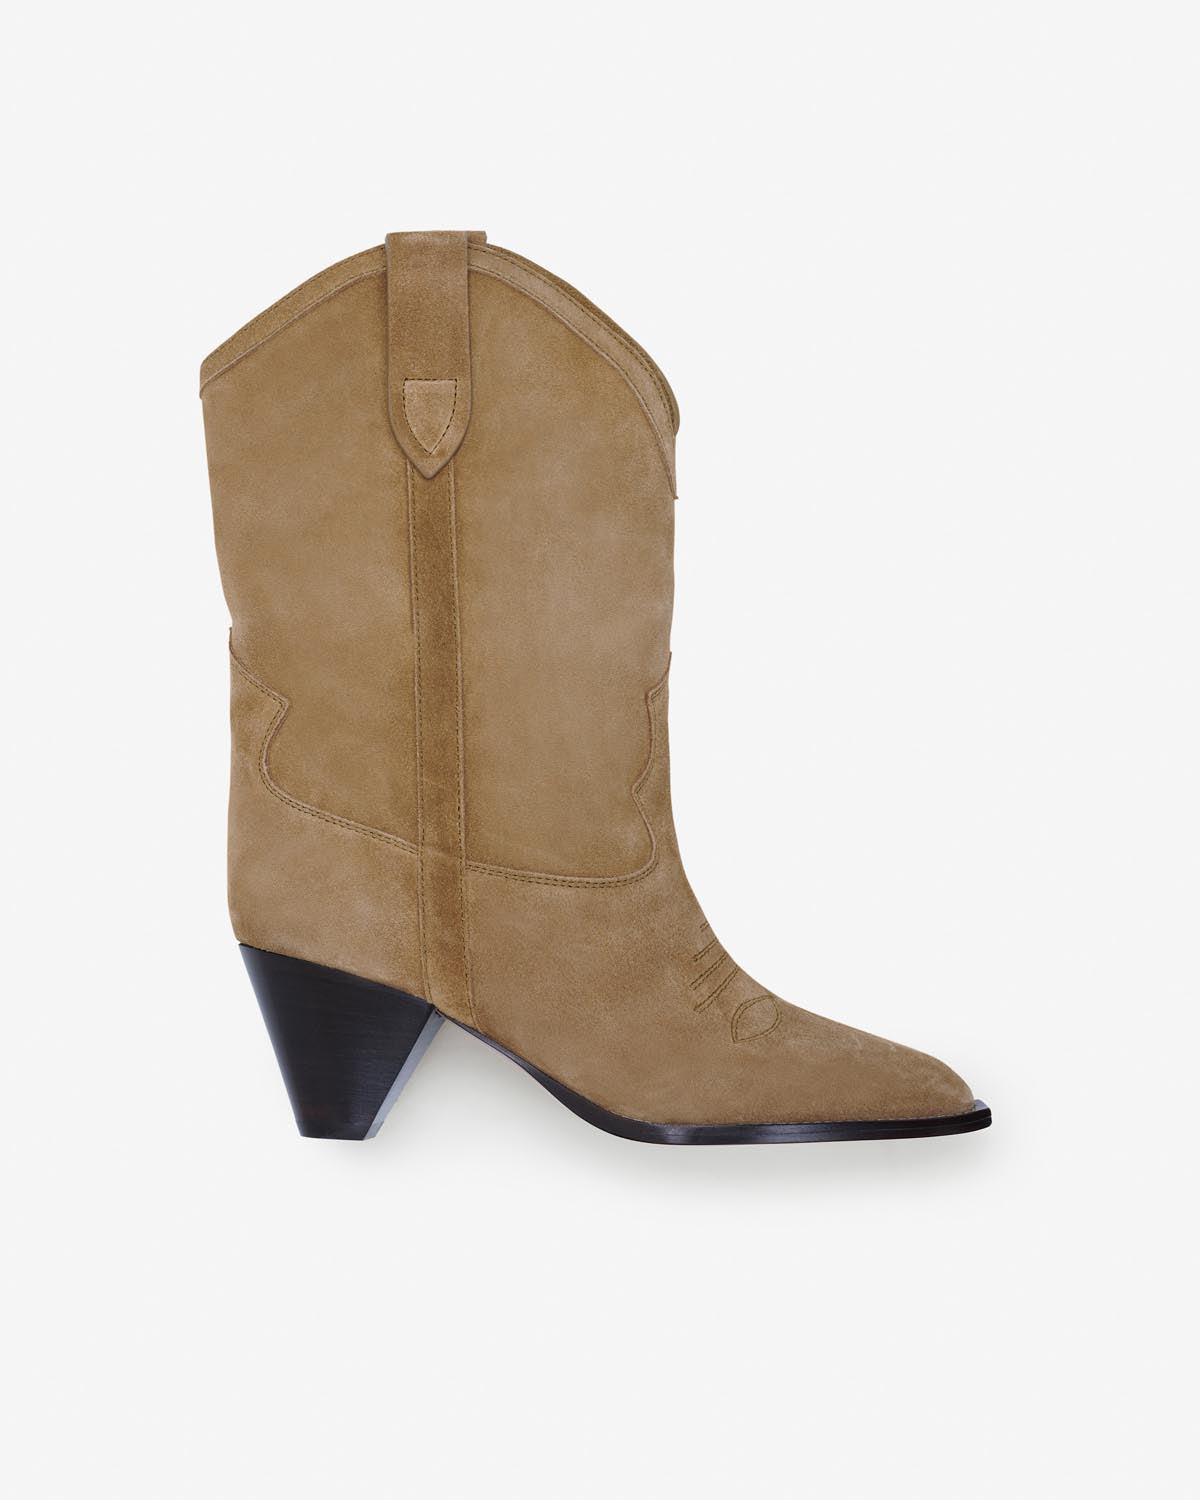 Boots luliette Woman Taupe 5